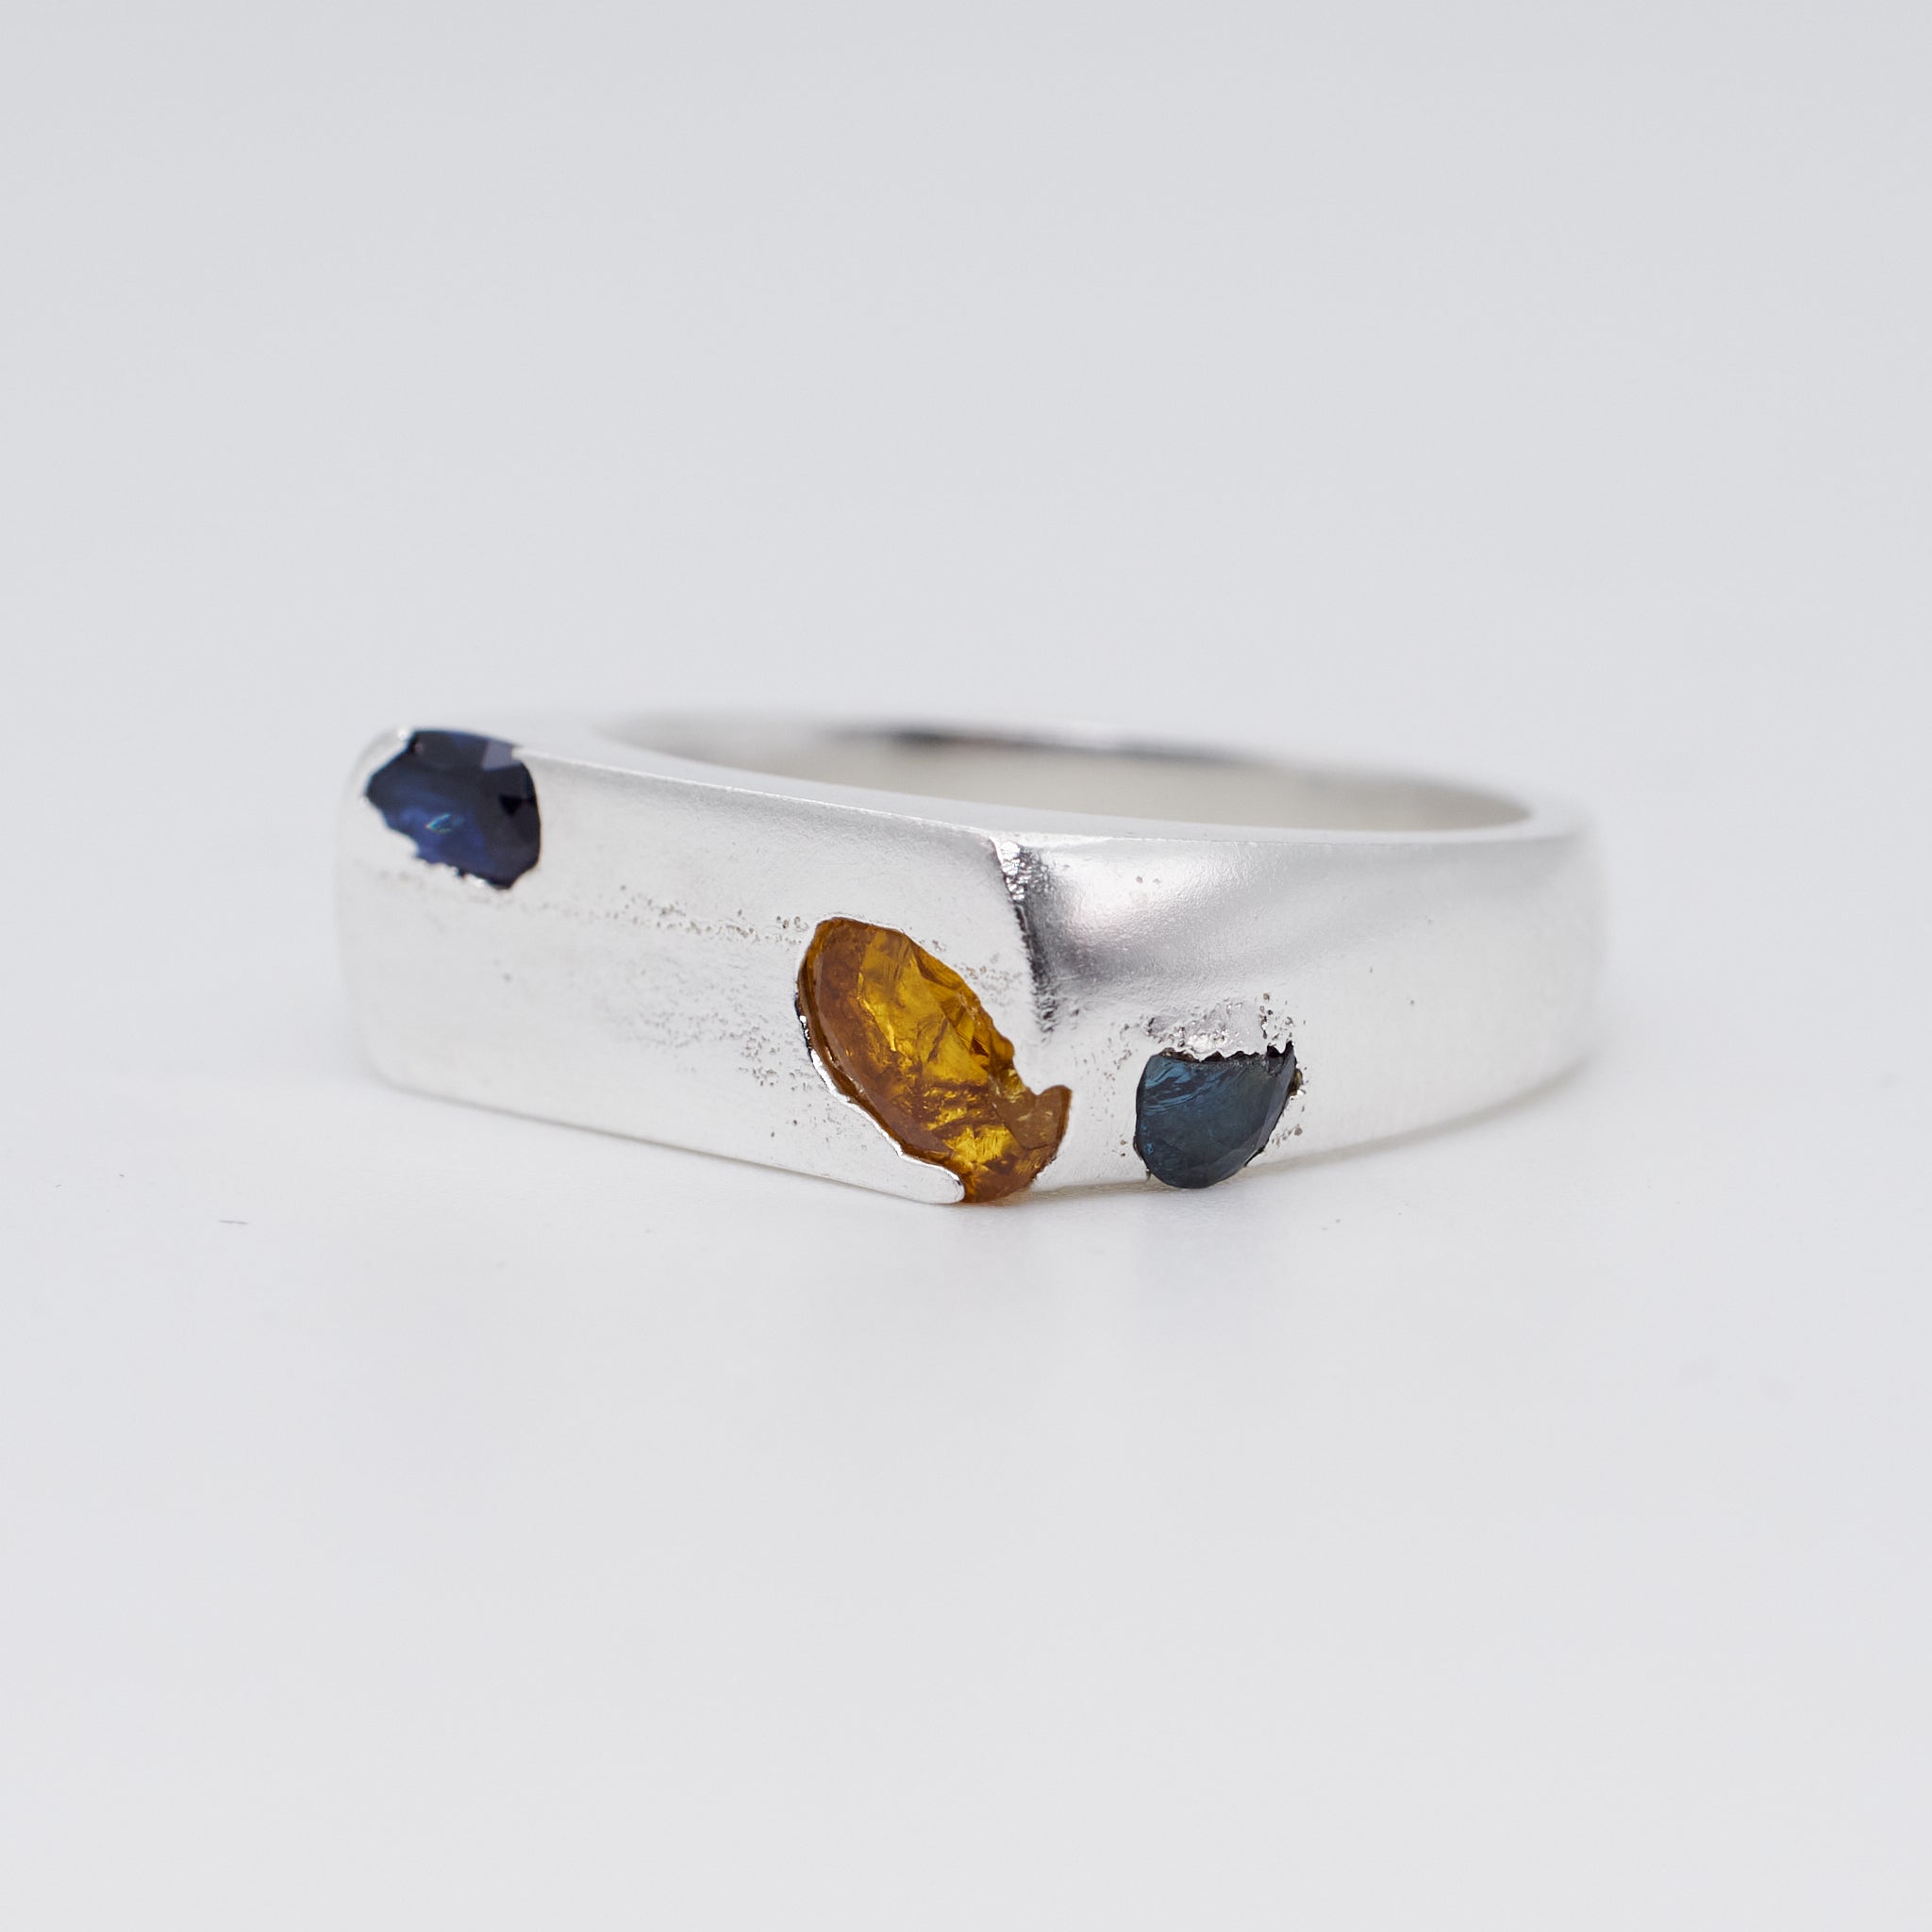 *SAMPLE SALE* The Buzz – Sterling Silver with Sapphires – EUR 54 | US 6¾